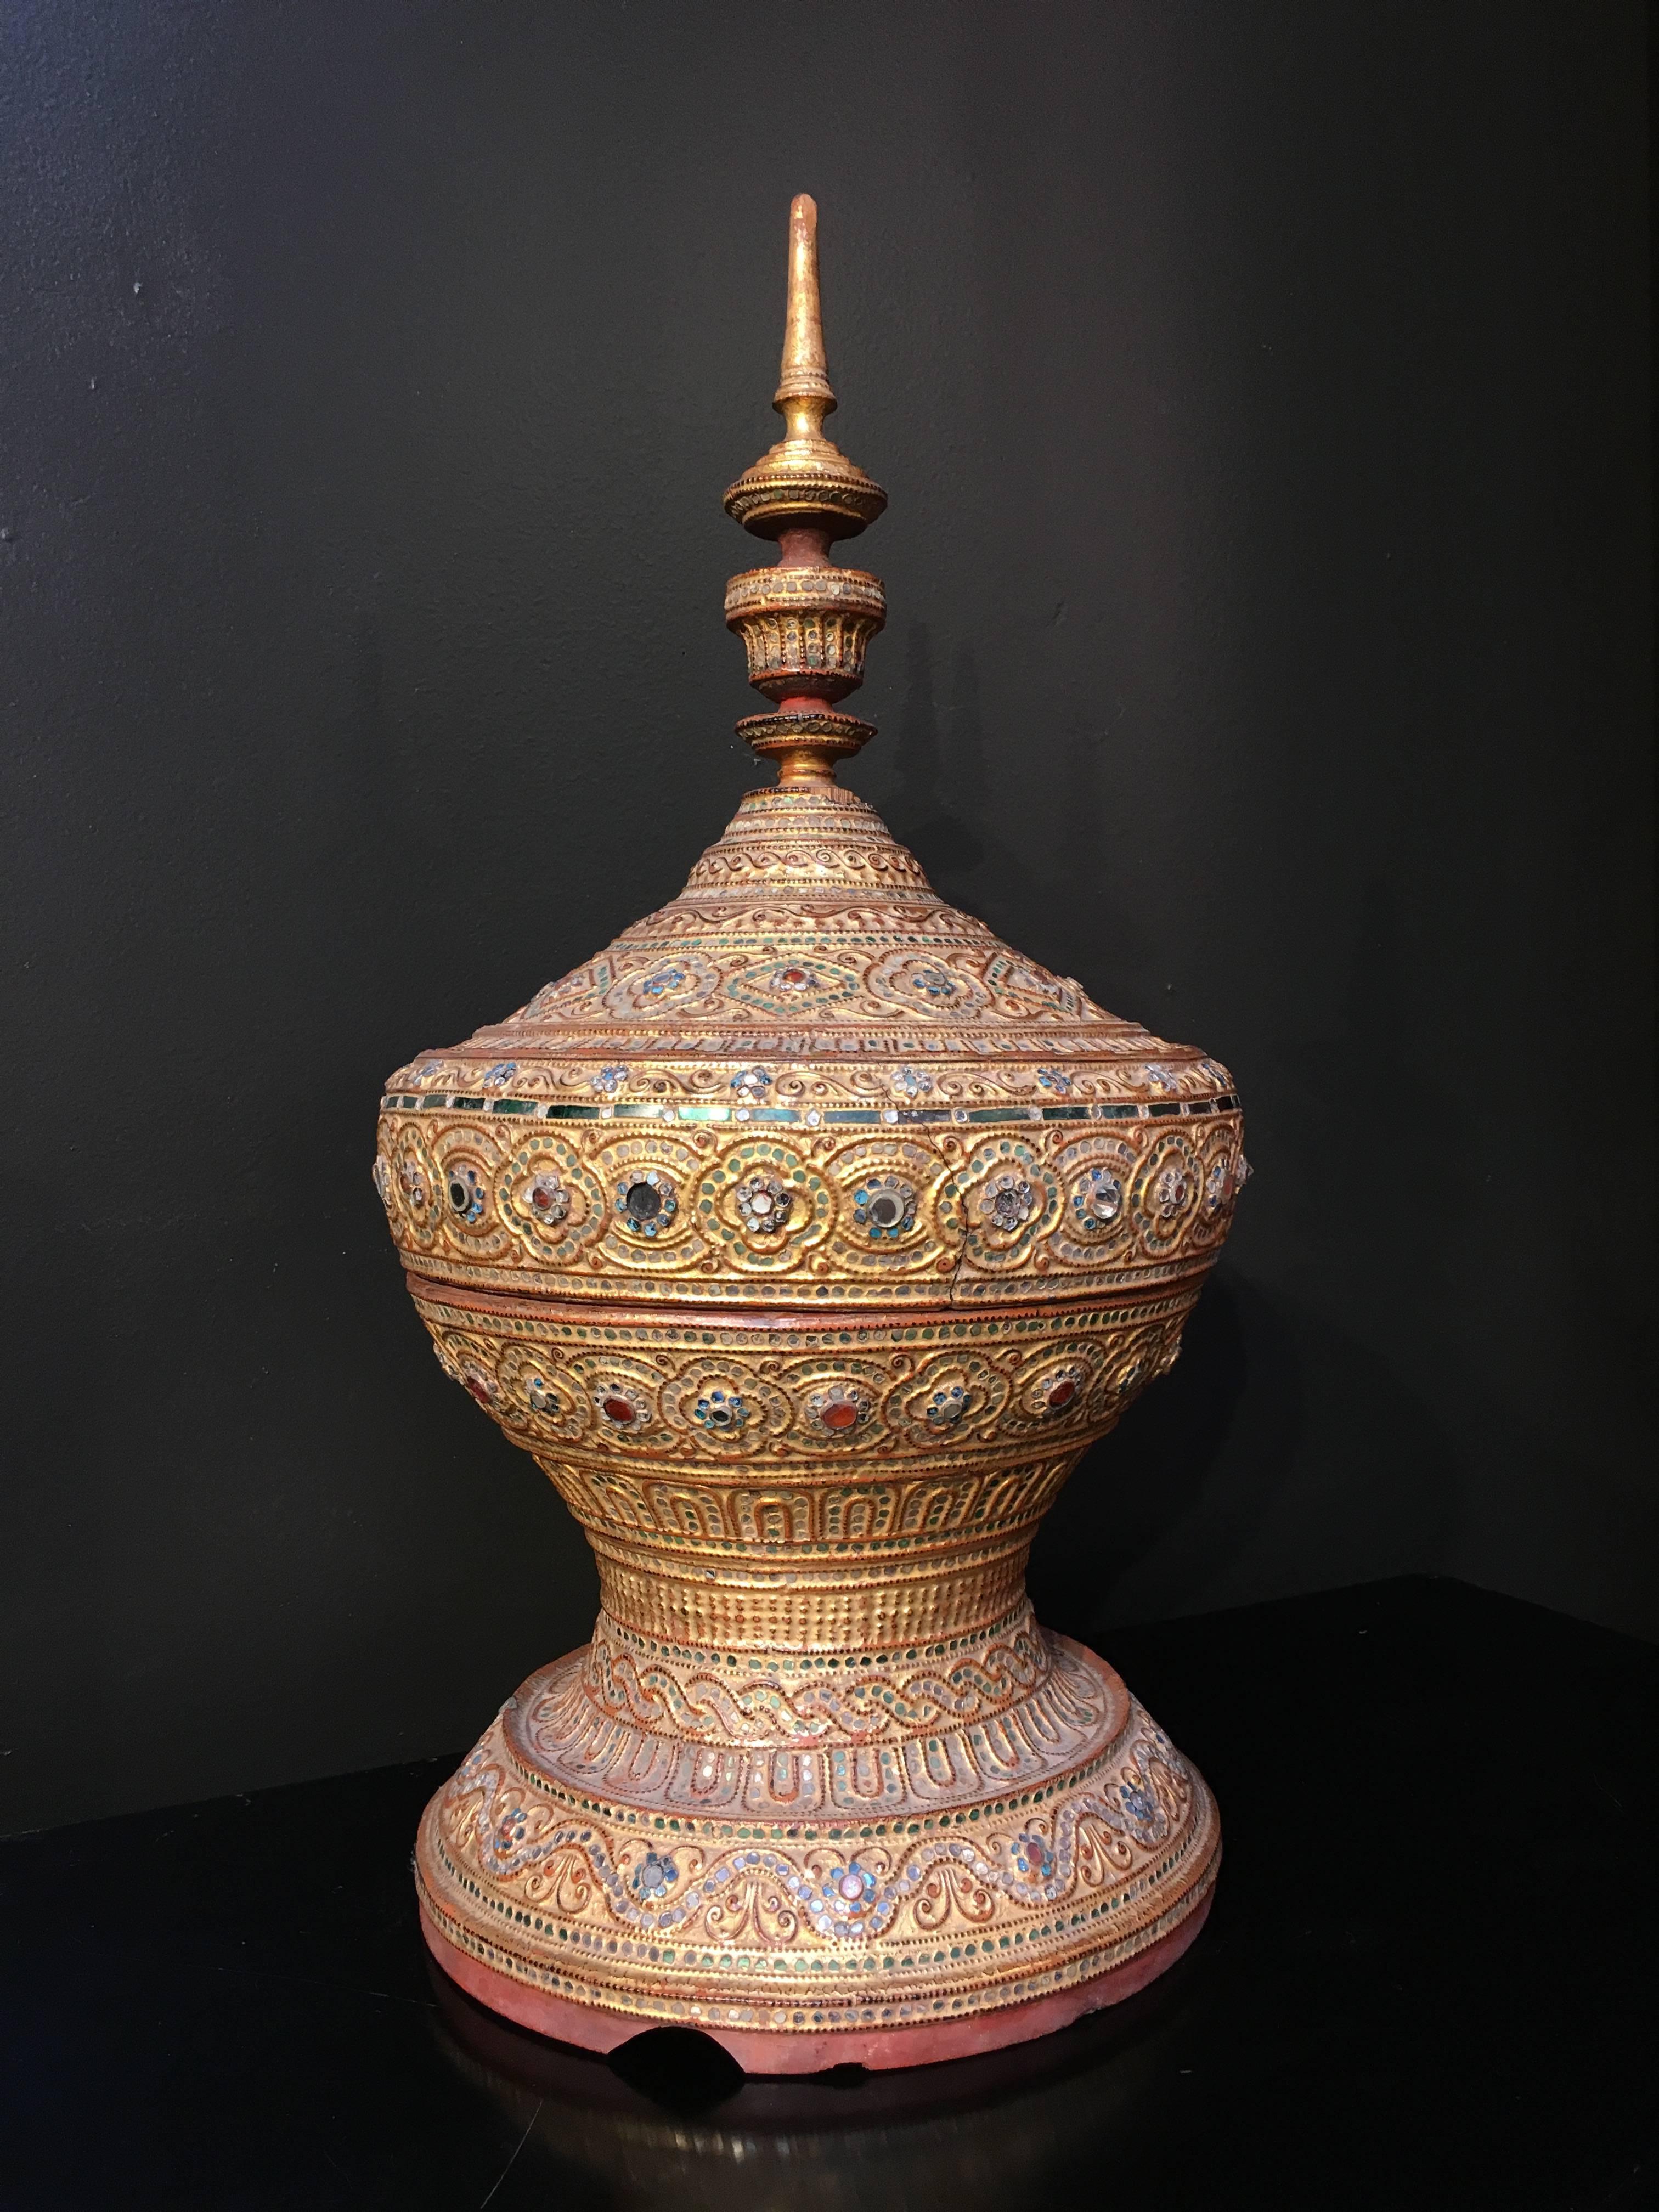 A resplendent Burmese Mandalay period offering vessel, called a hsun-ok, early 20th century. 
The shape is reminiscent of a stupa, a Buddhist architectural monument honouring a sacred site.
Crafted from bamboo, overlaid with lacquer, gilt, and